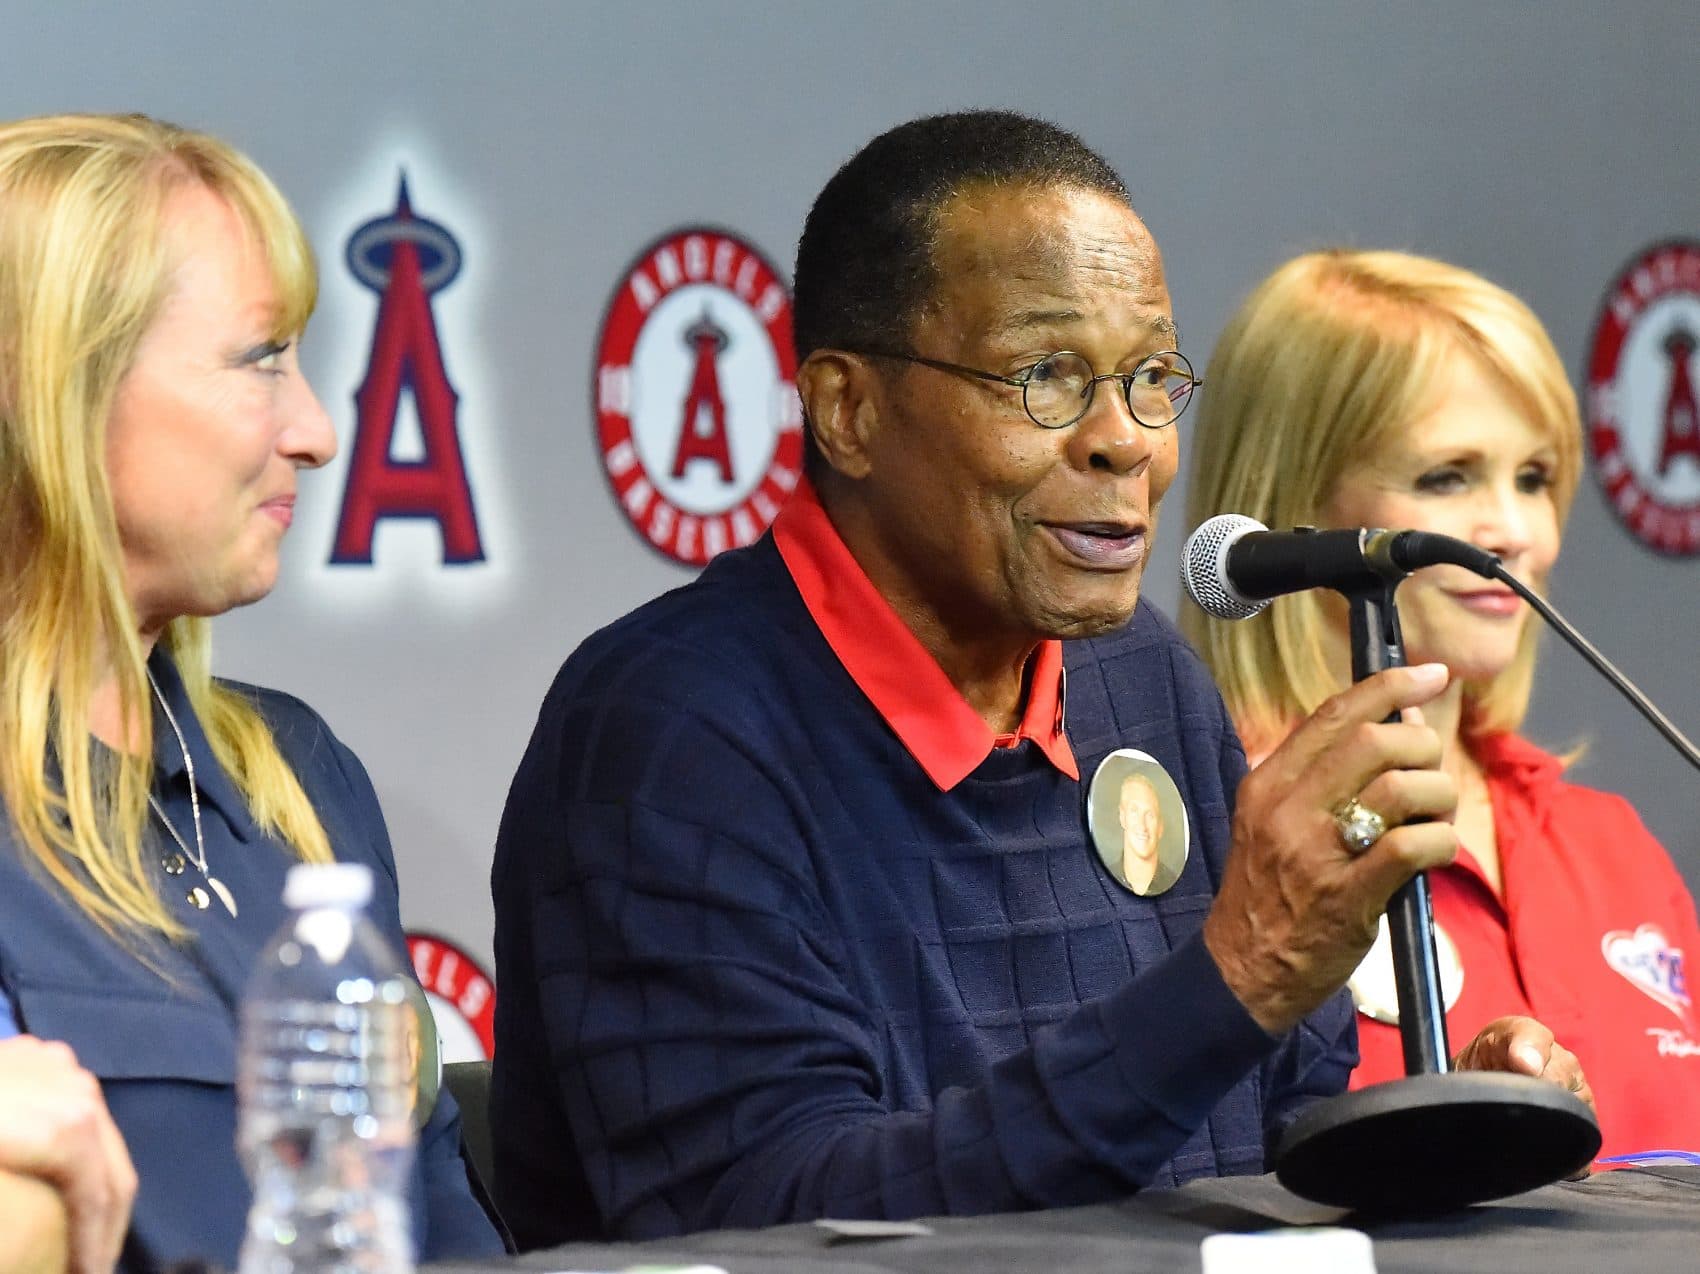 Rod Carew bringing lots of heart to Hall of Fame this weekend